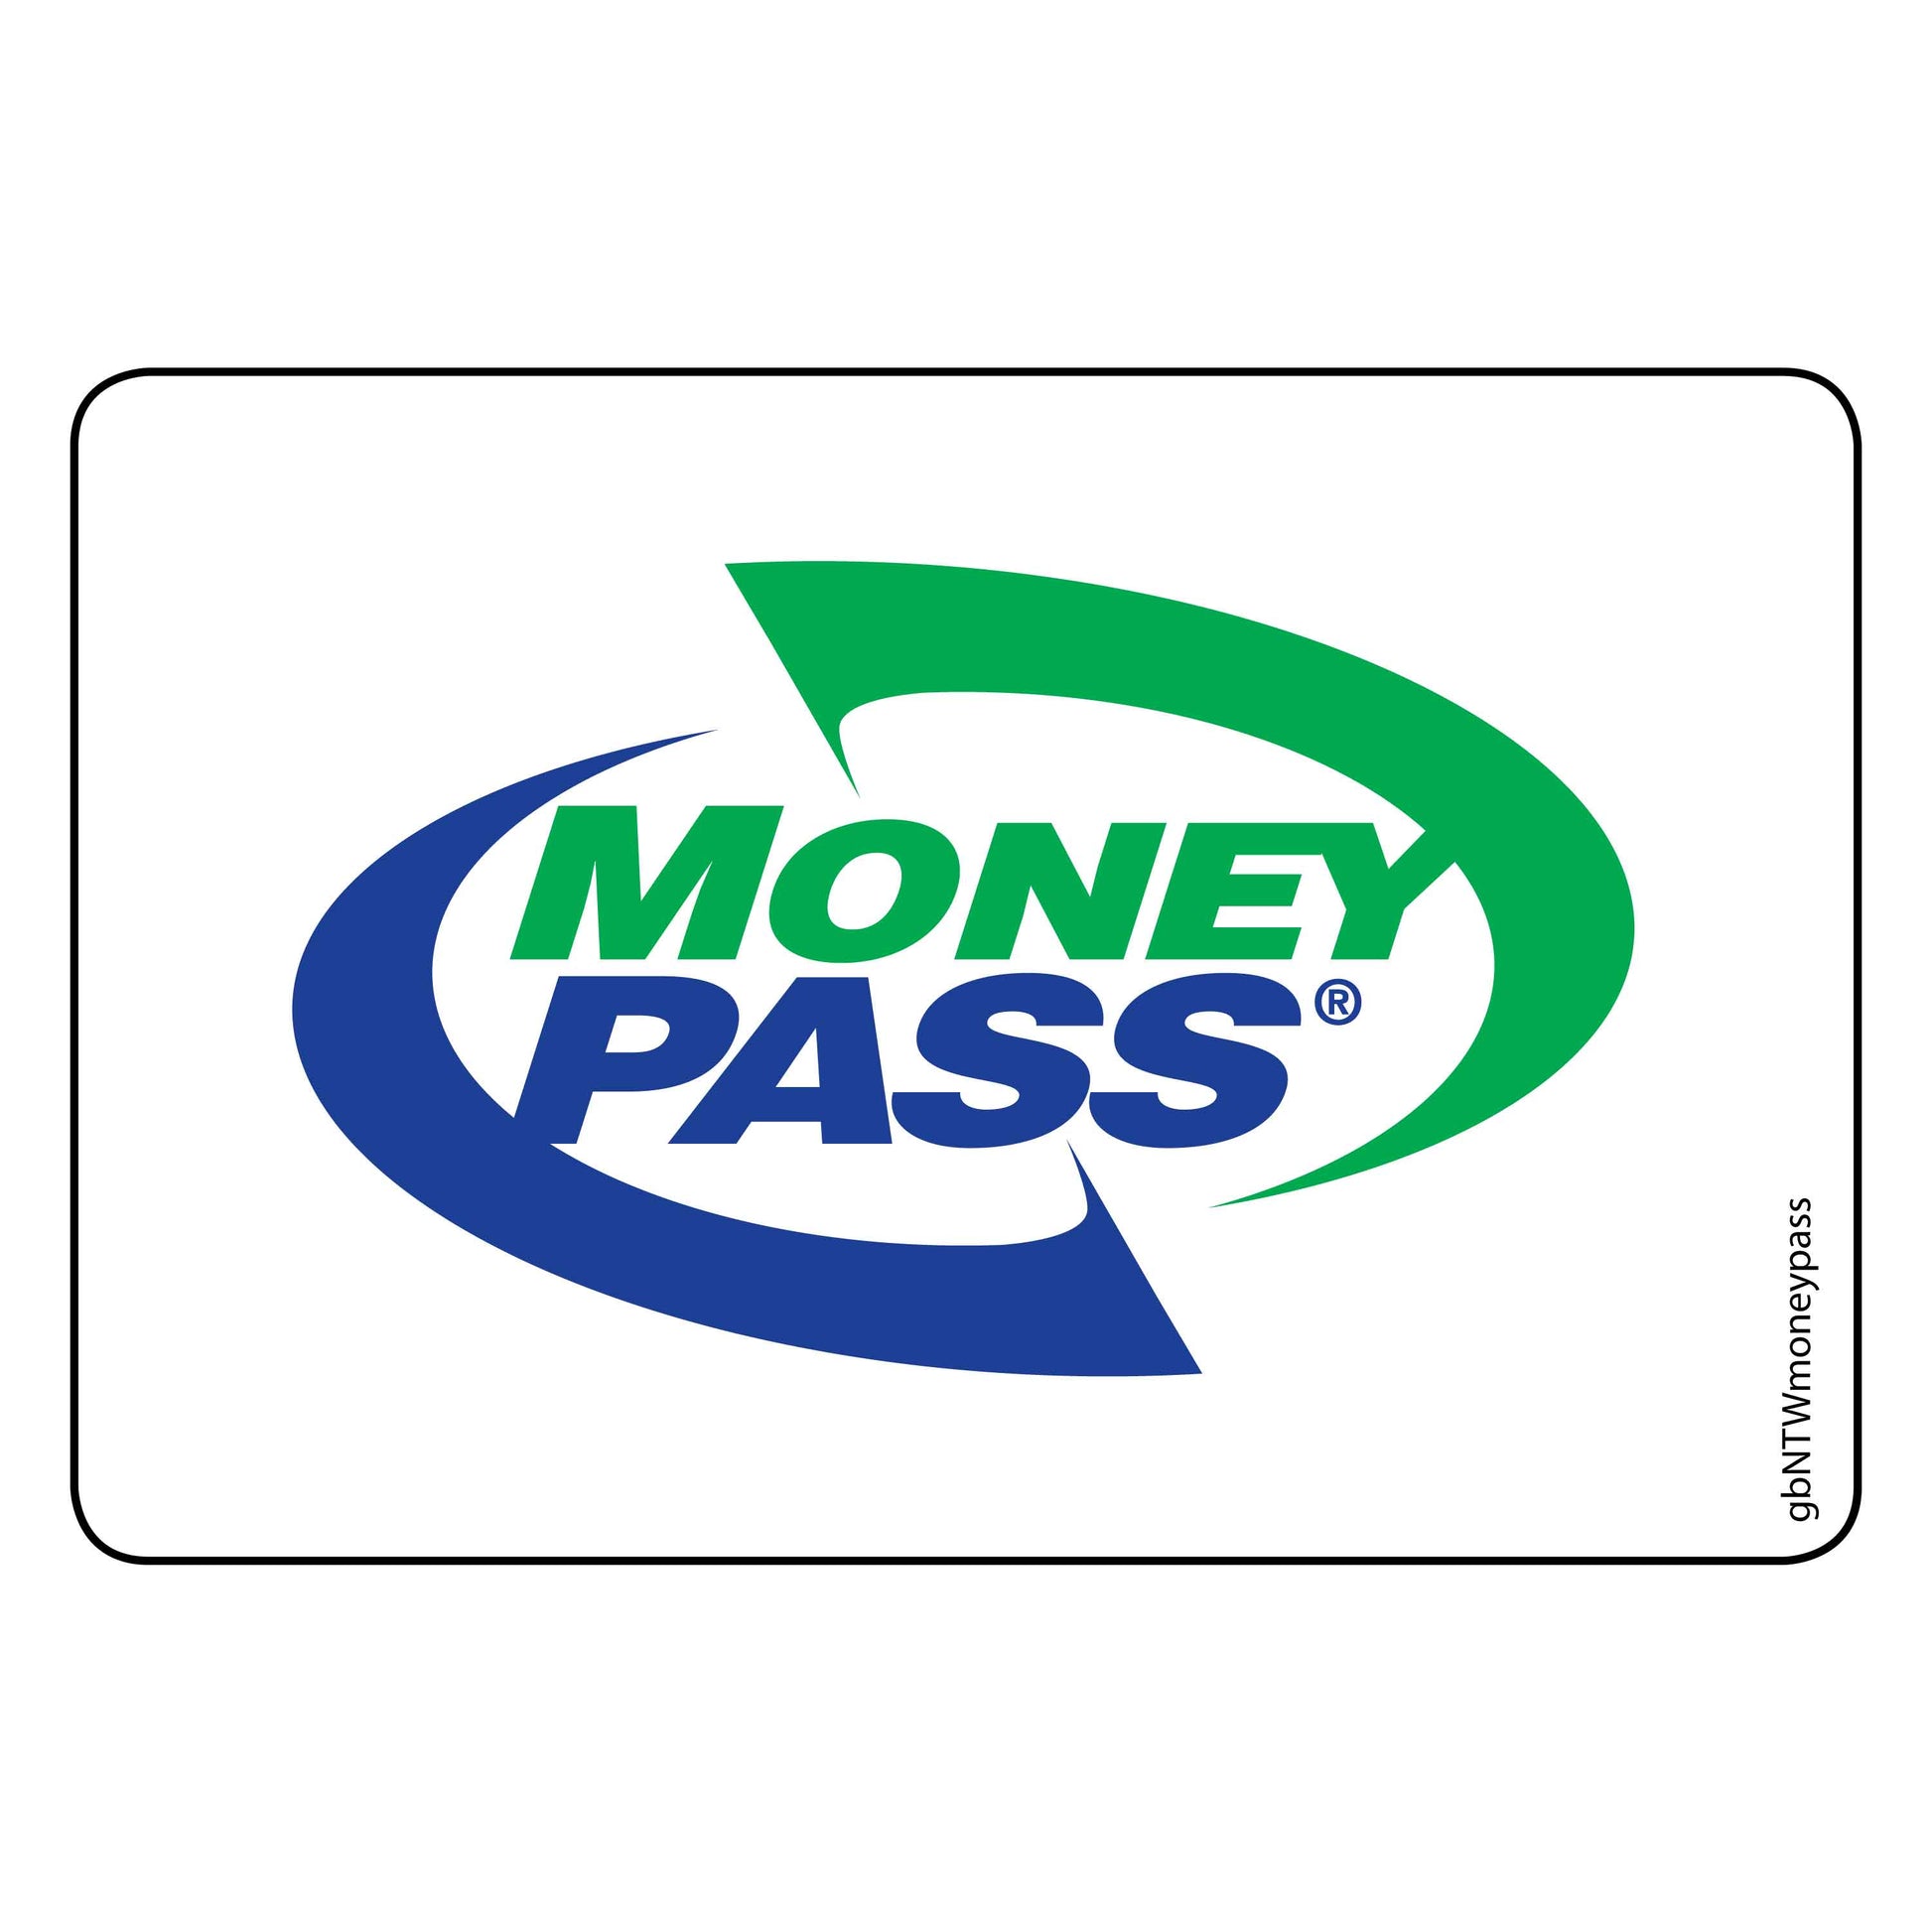 Single Network Decal, Moneypass. 3 inches by 2 inches in size. 